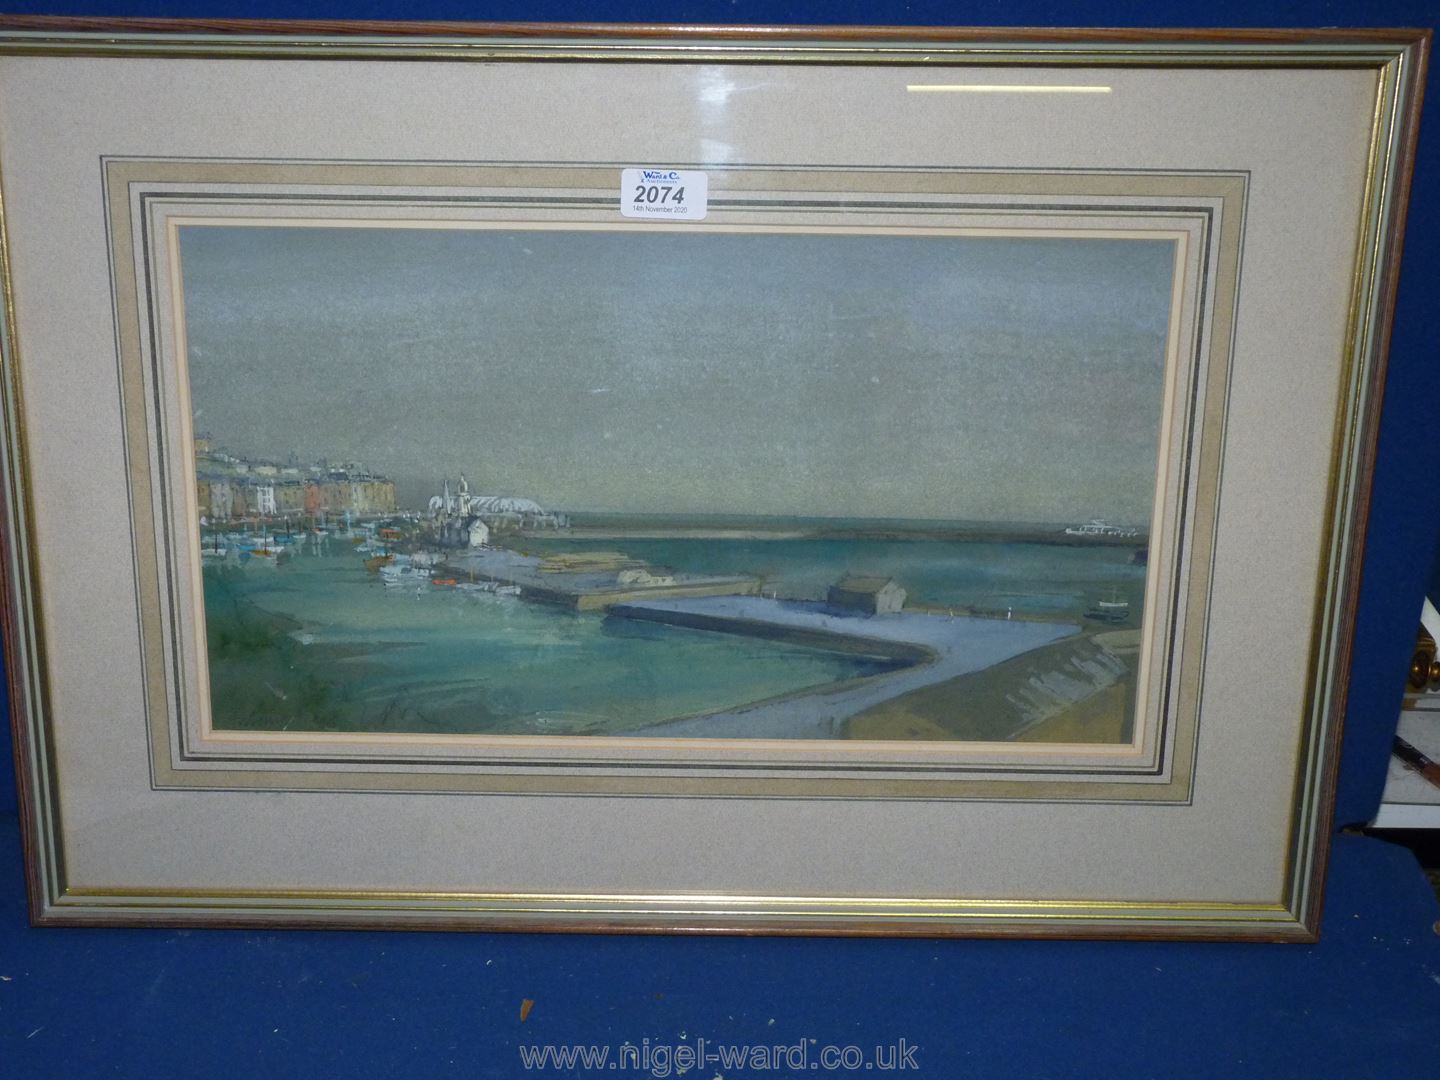 A framed and mounted Watercolour signed lower left Anthony Kerr, label verso "Ramsgate Harbour",